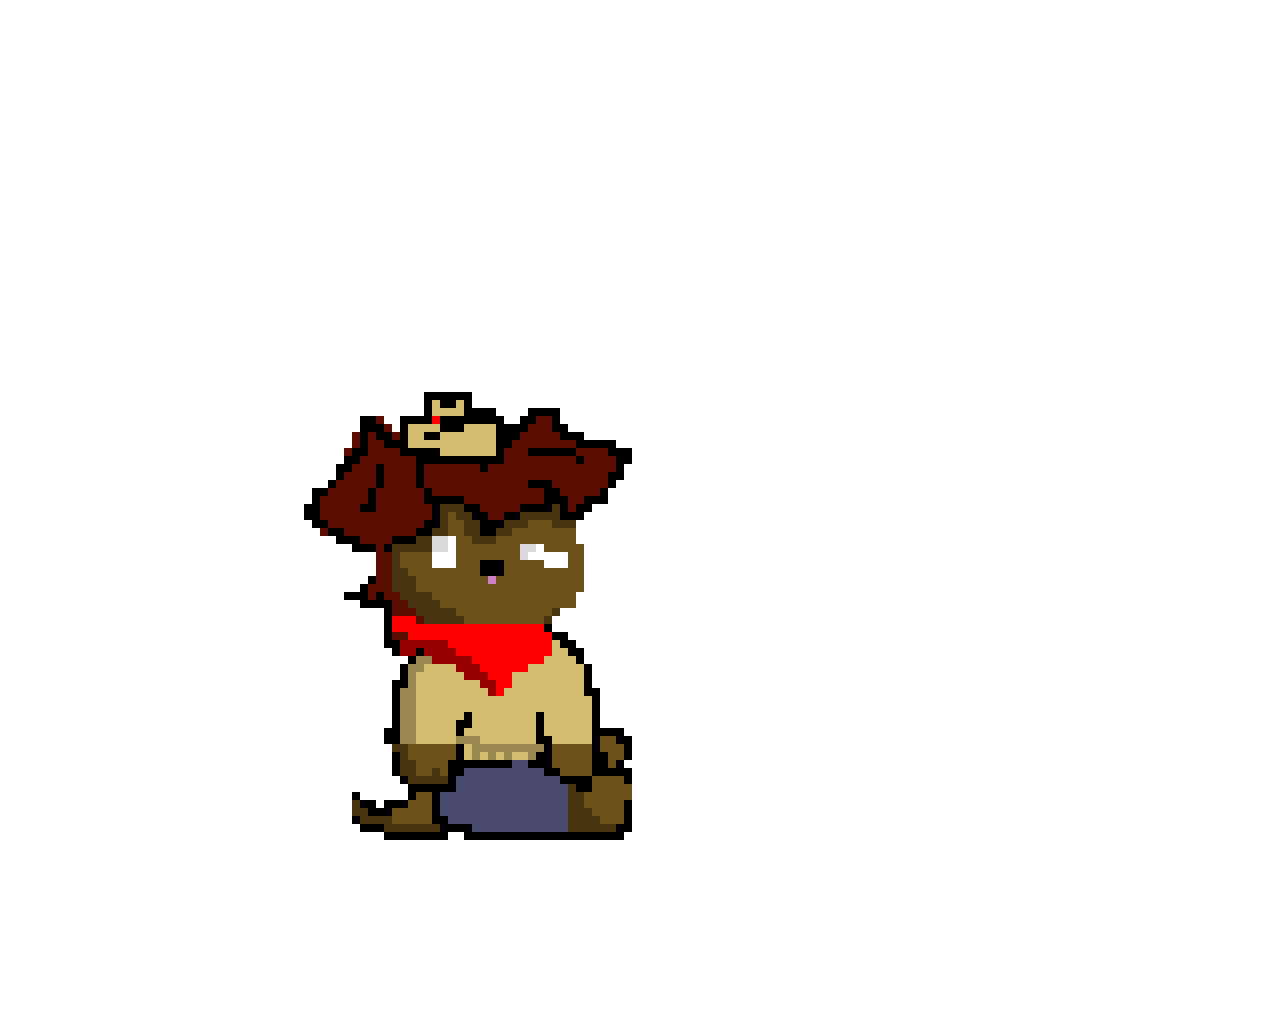 chocolate dog, cookie run kingdom ( not actual character i made it up)